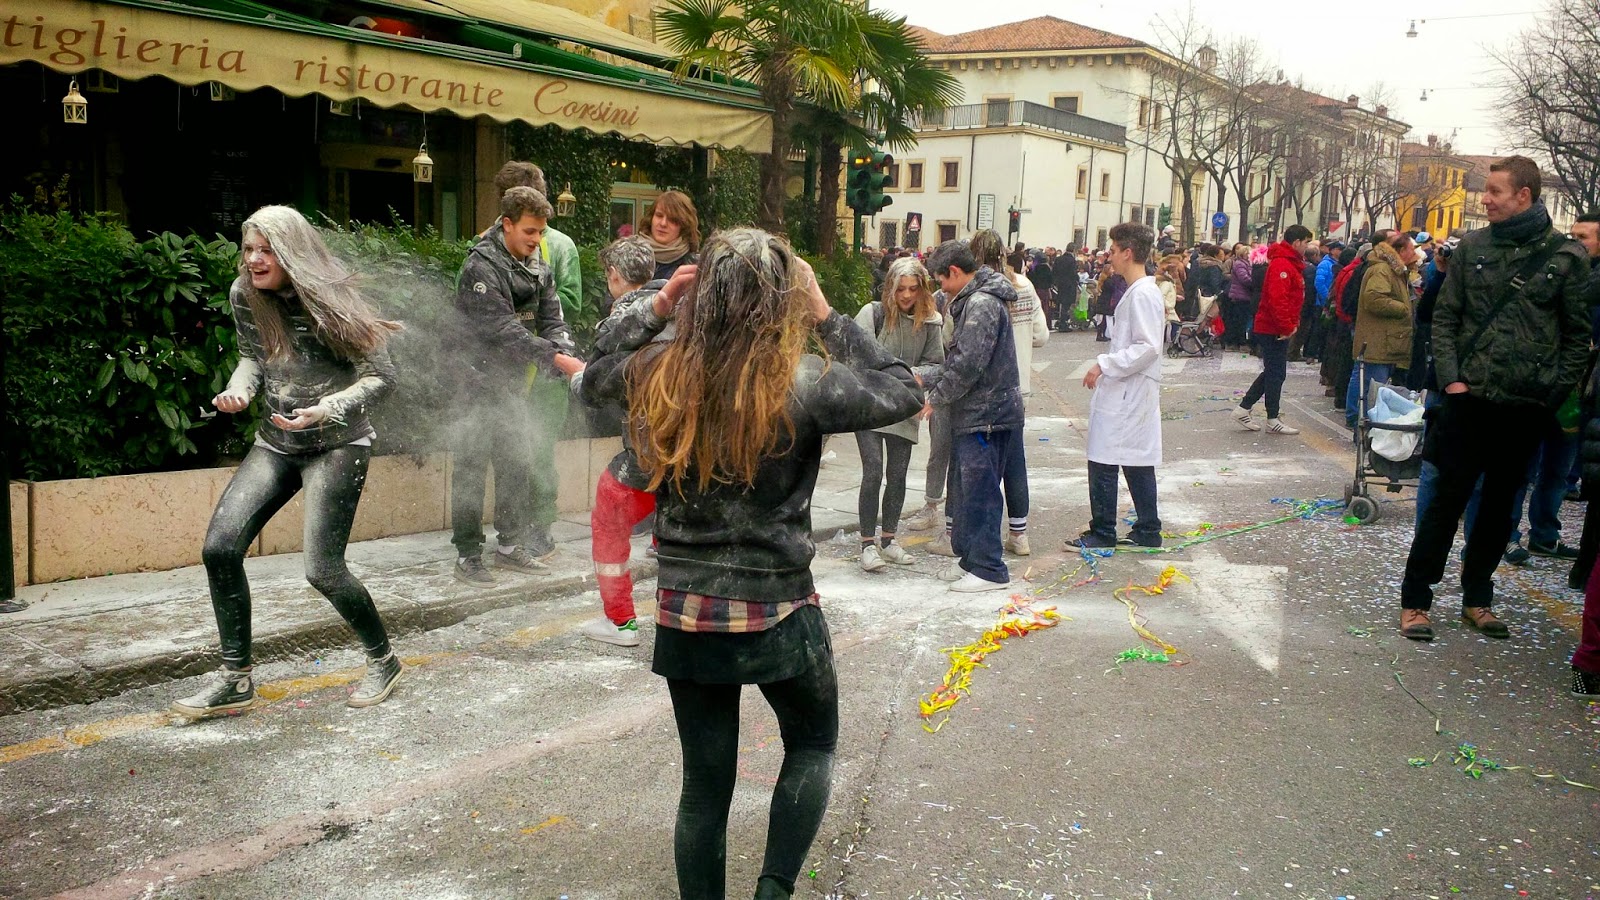 Teenagers throwing flour at each other during the parade for Verona Carnival